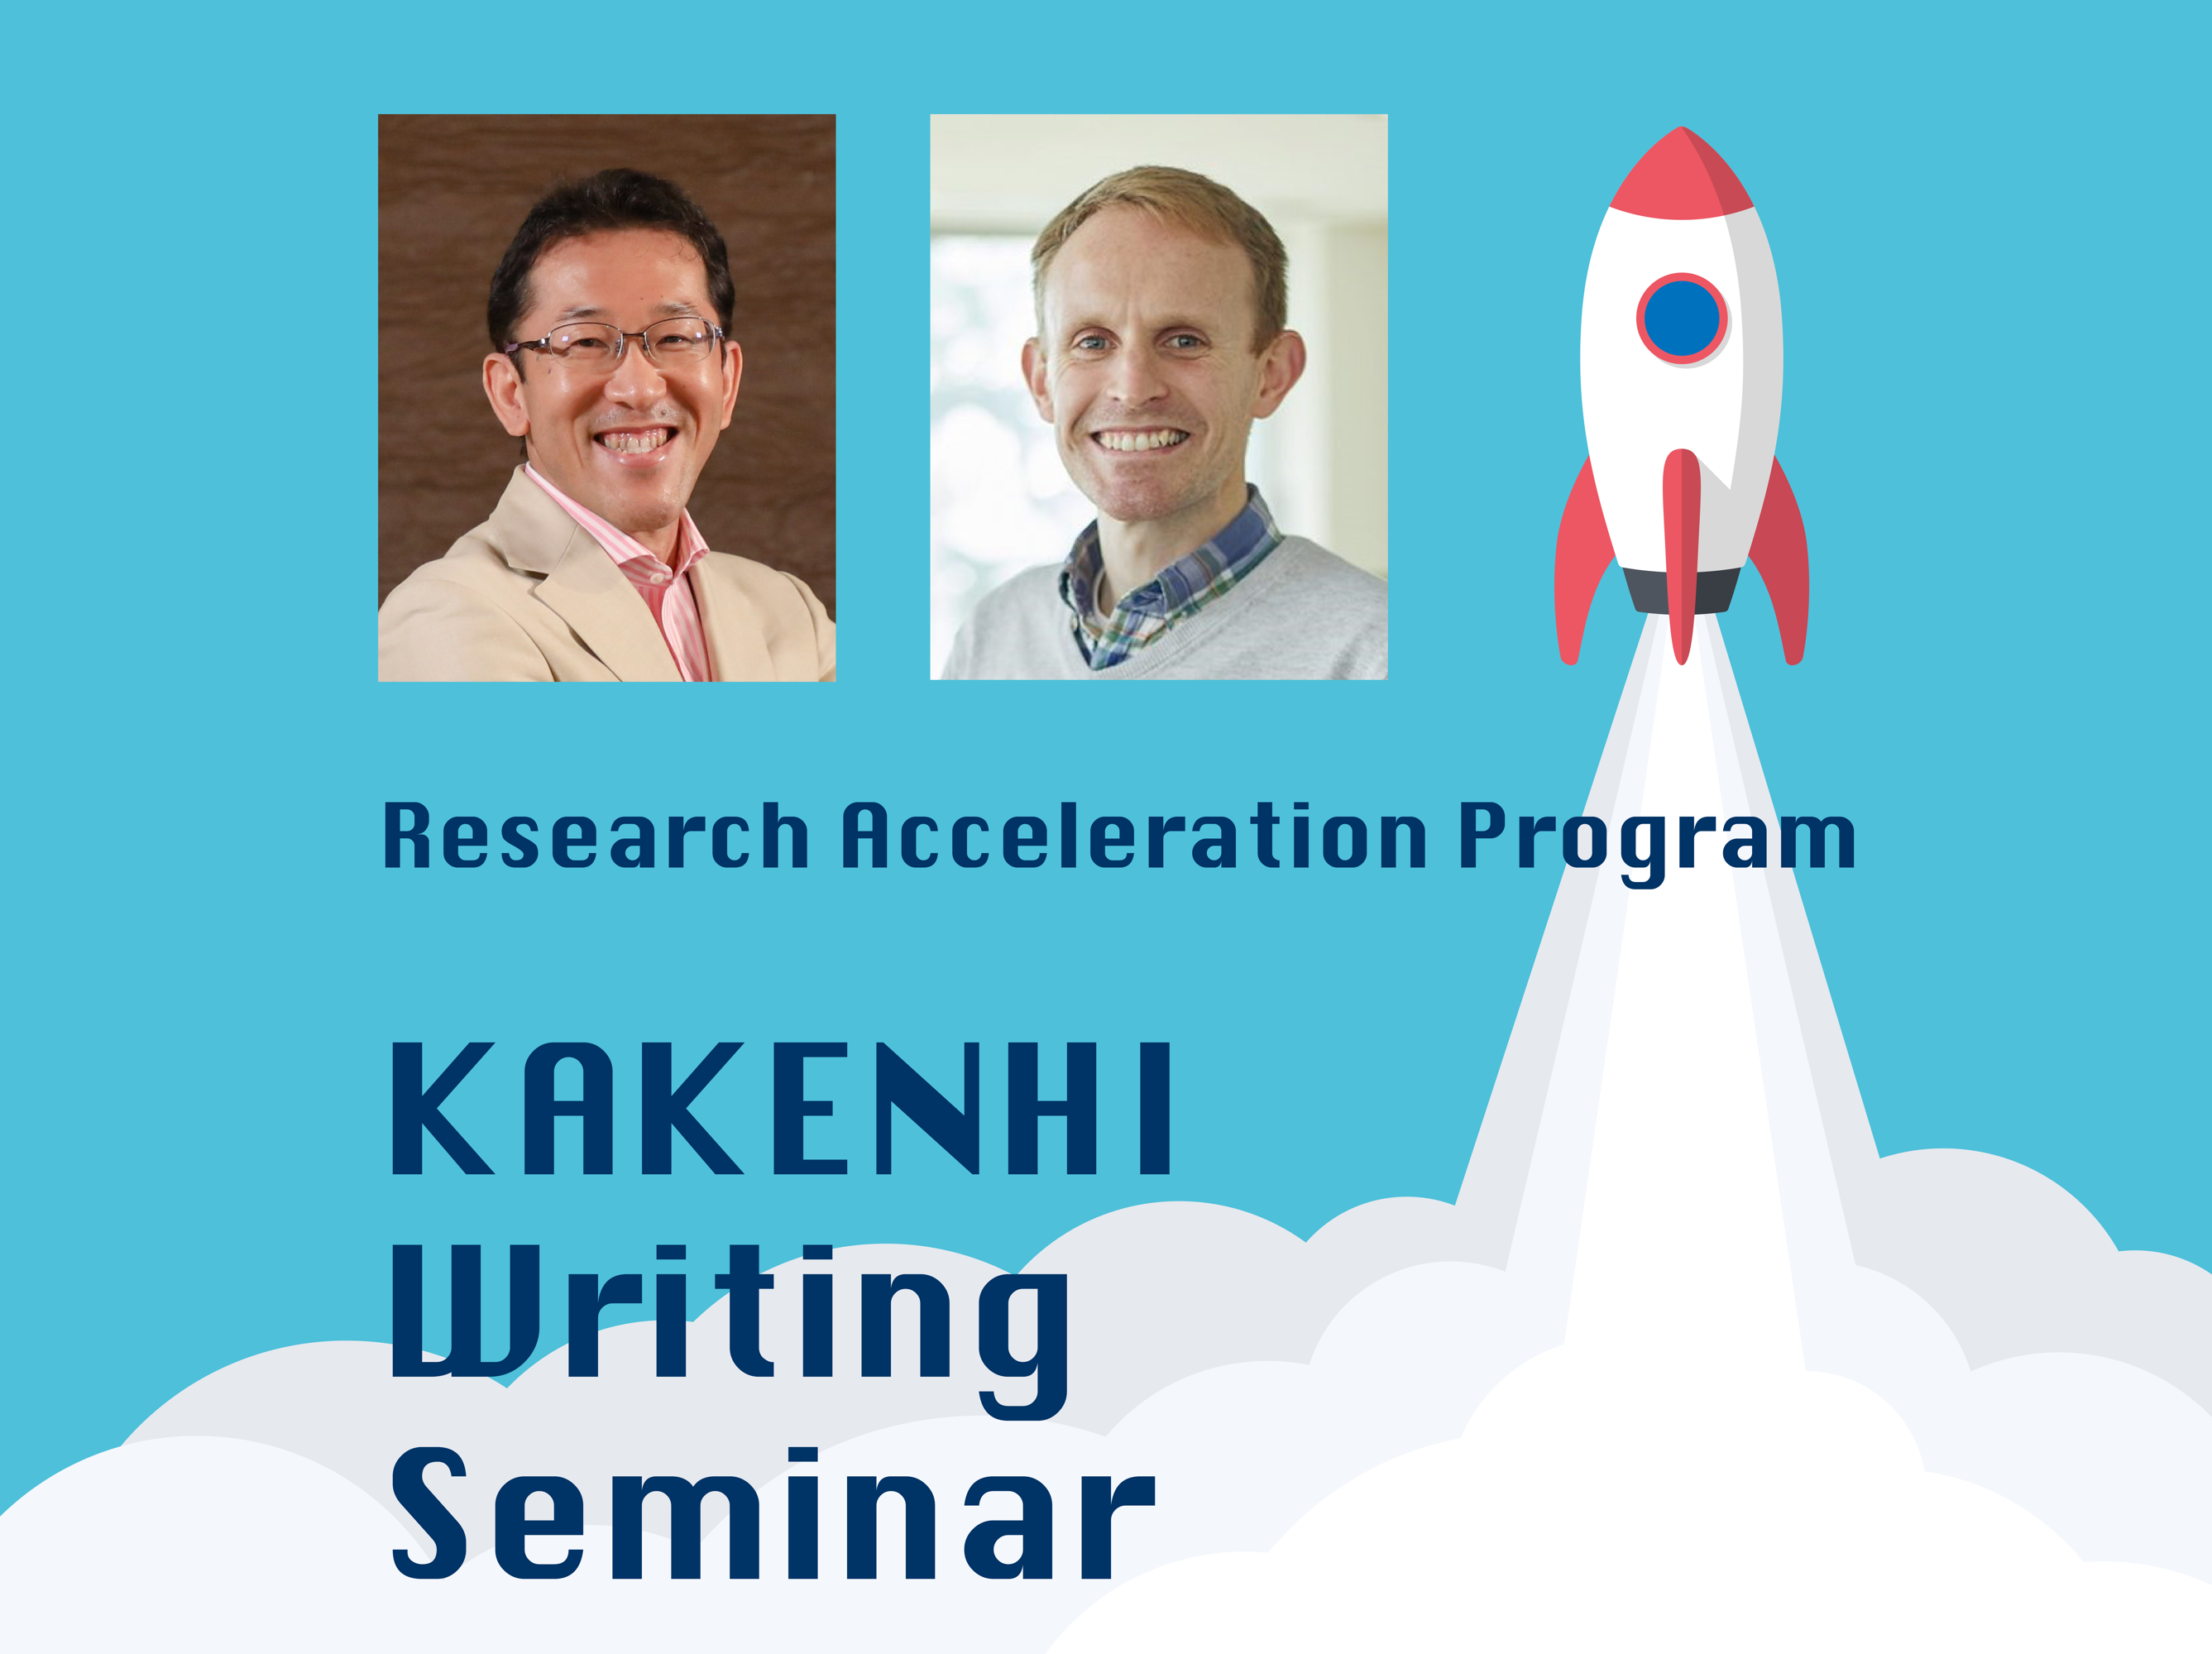 KAKENHI WRITING SEMINAR: Telling your research story effectively